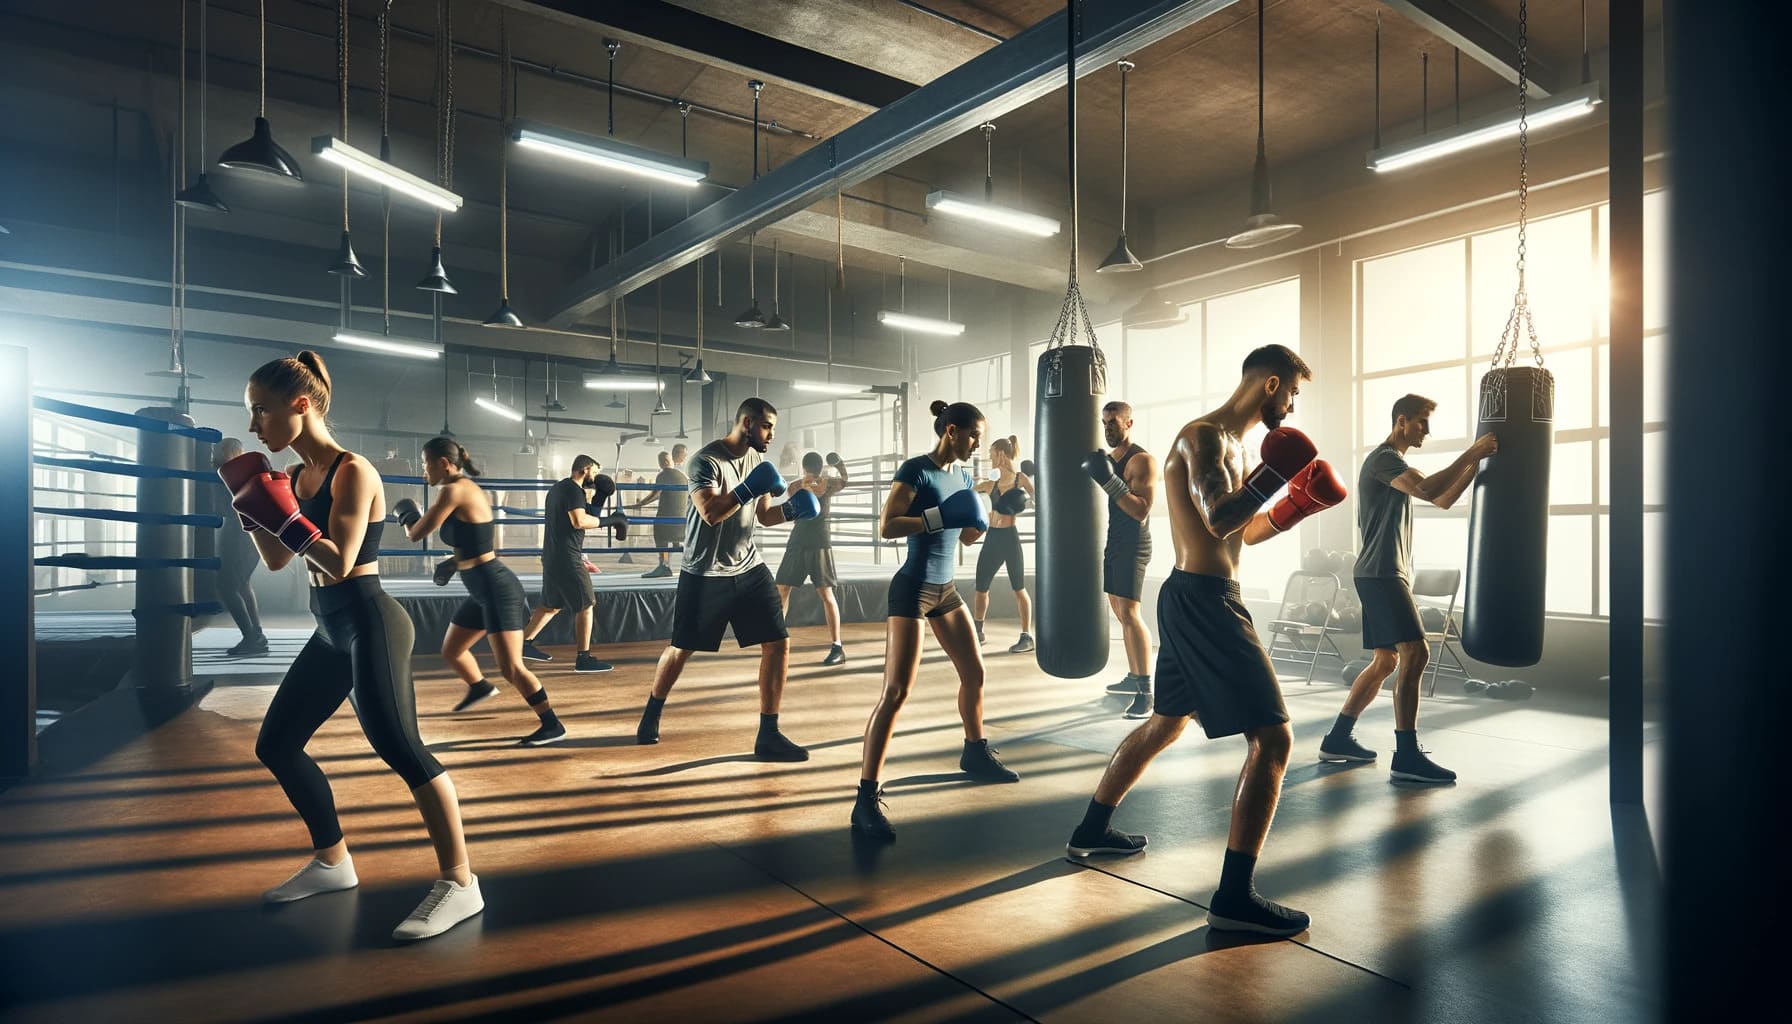 Group of people training in boxing gym with punching bags and boxing ring